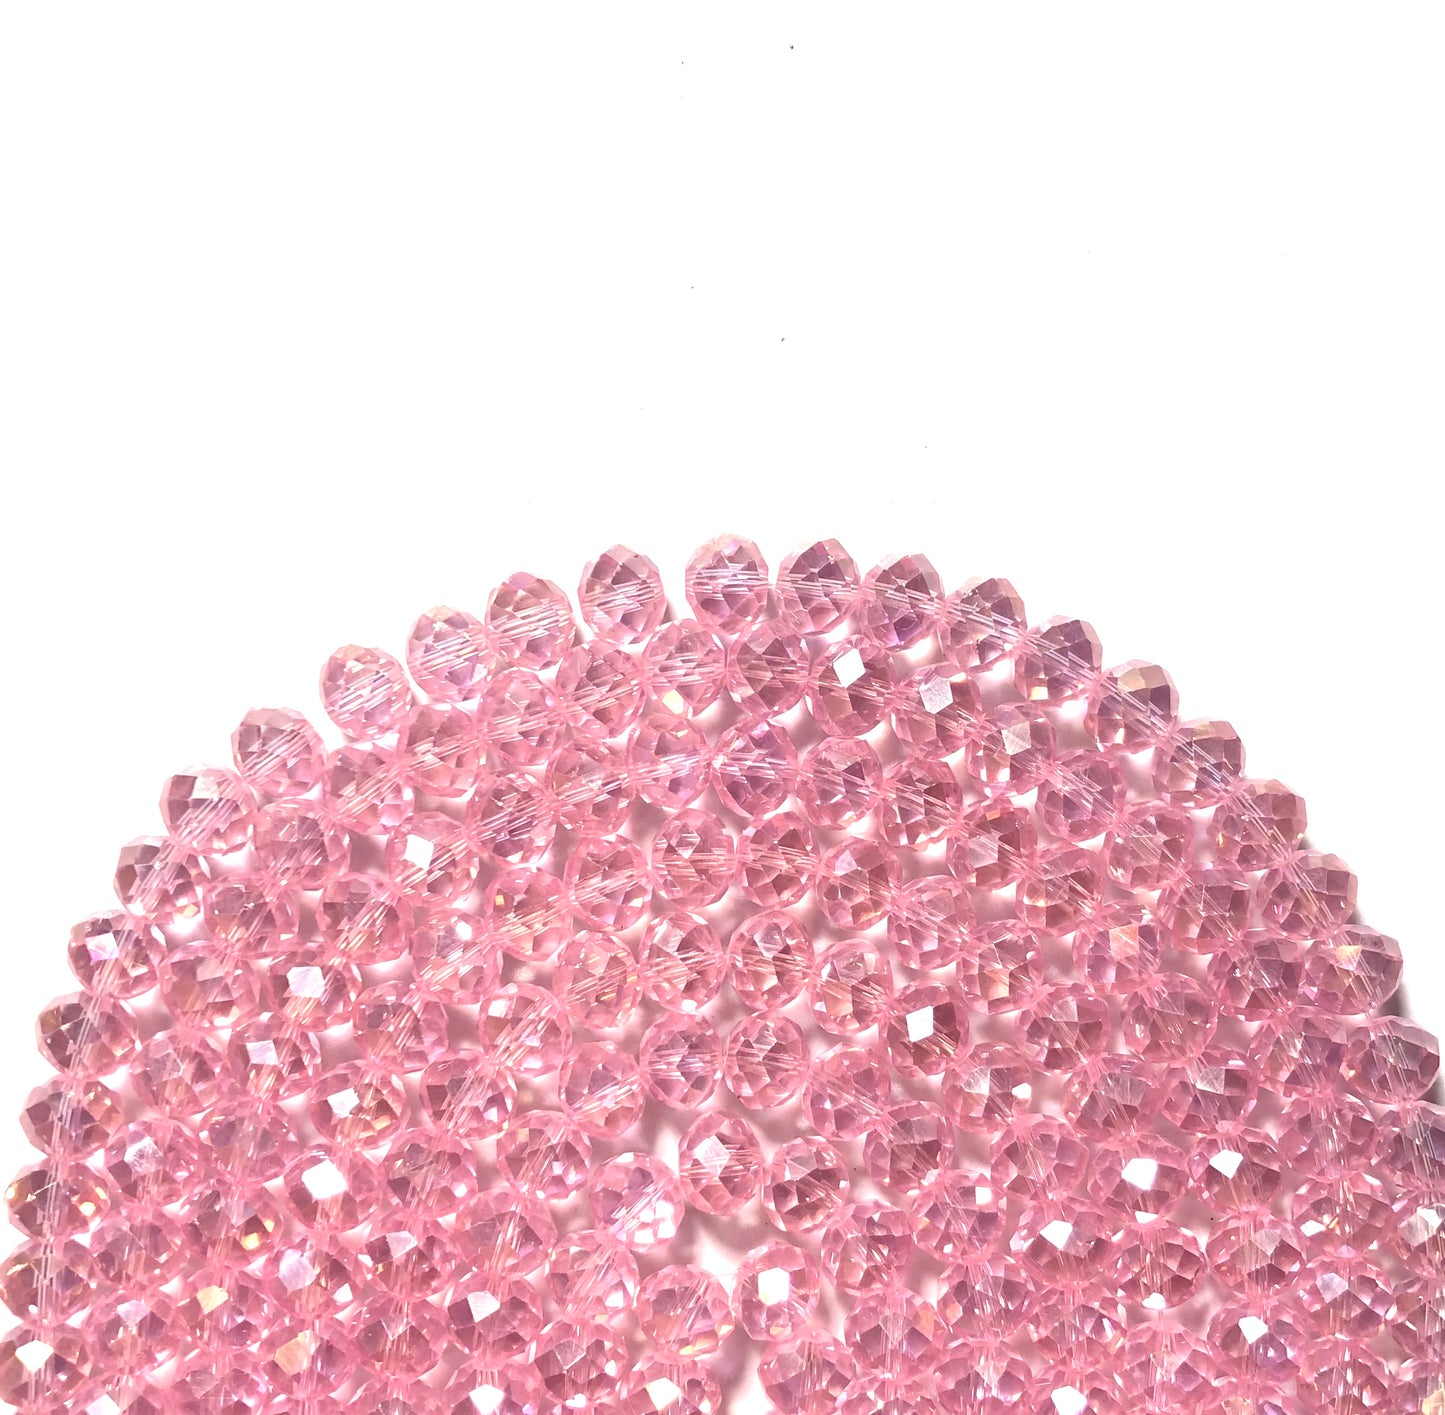 2 Strands/lot 10mm Clear Pink Faceted Glass Beads Clear Pink Glass Beads Breast Cancer Awareness Faceted Glass Beads Charms Beads Beyond